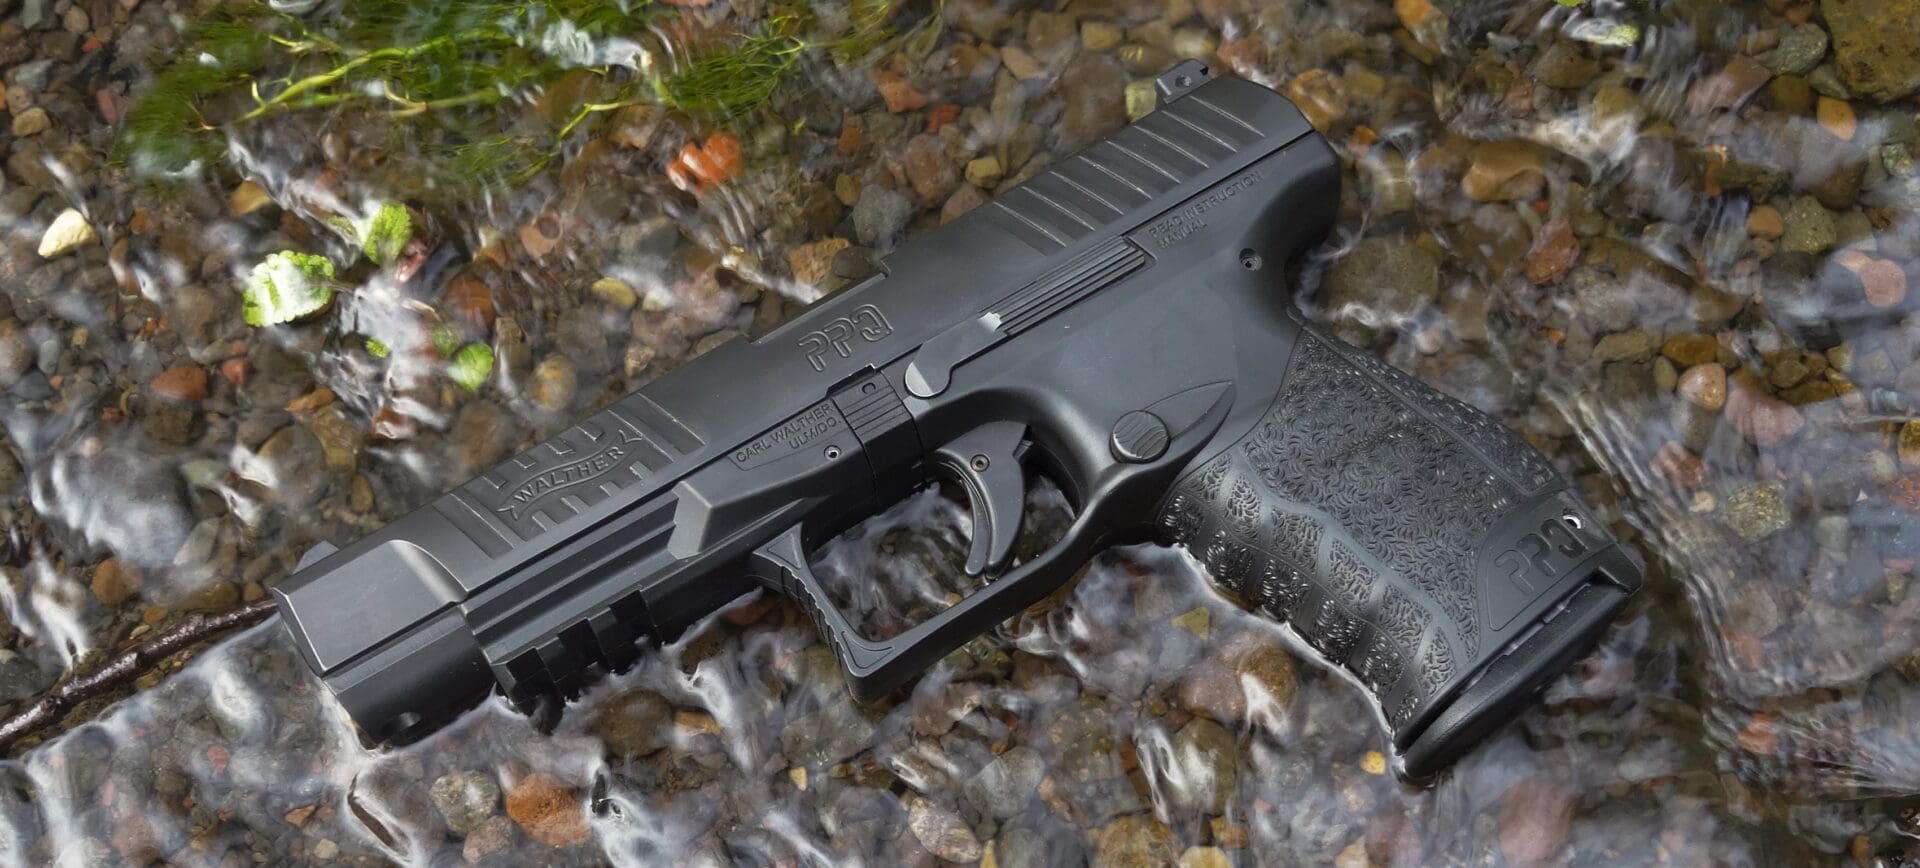 Gun Review: Walther PPQ M2 (5" Slide) - The Truth About Guns